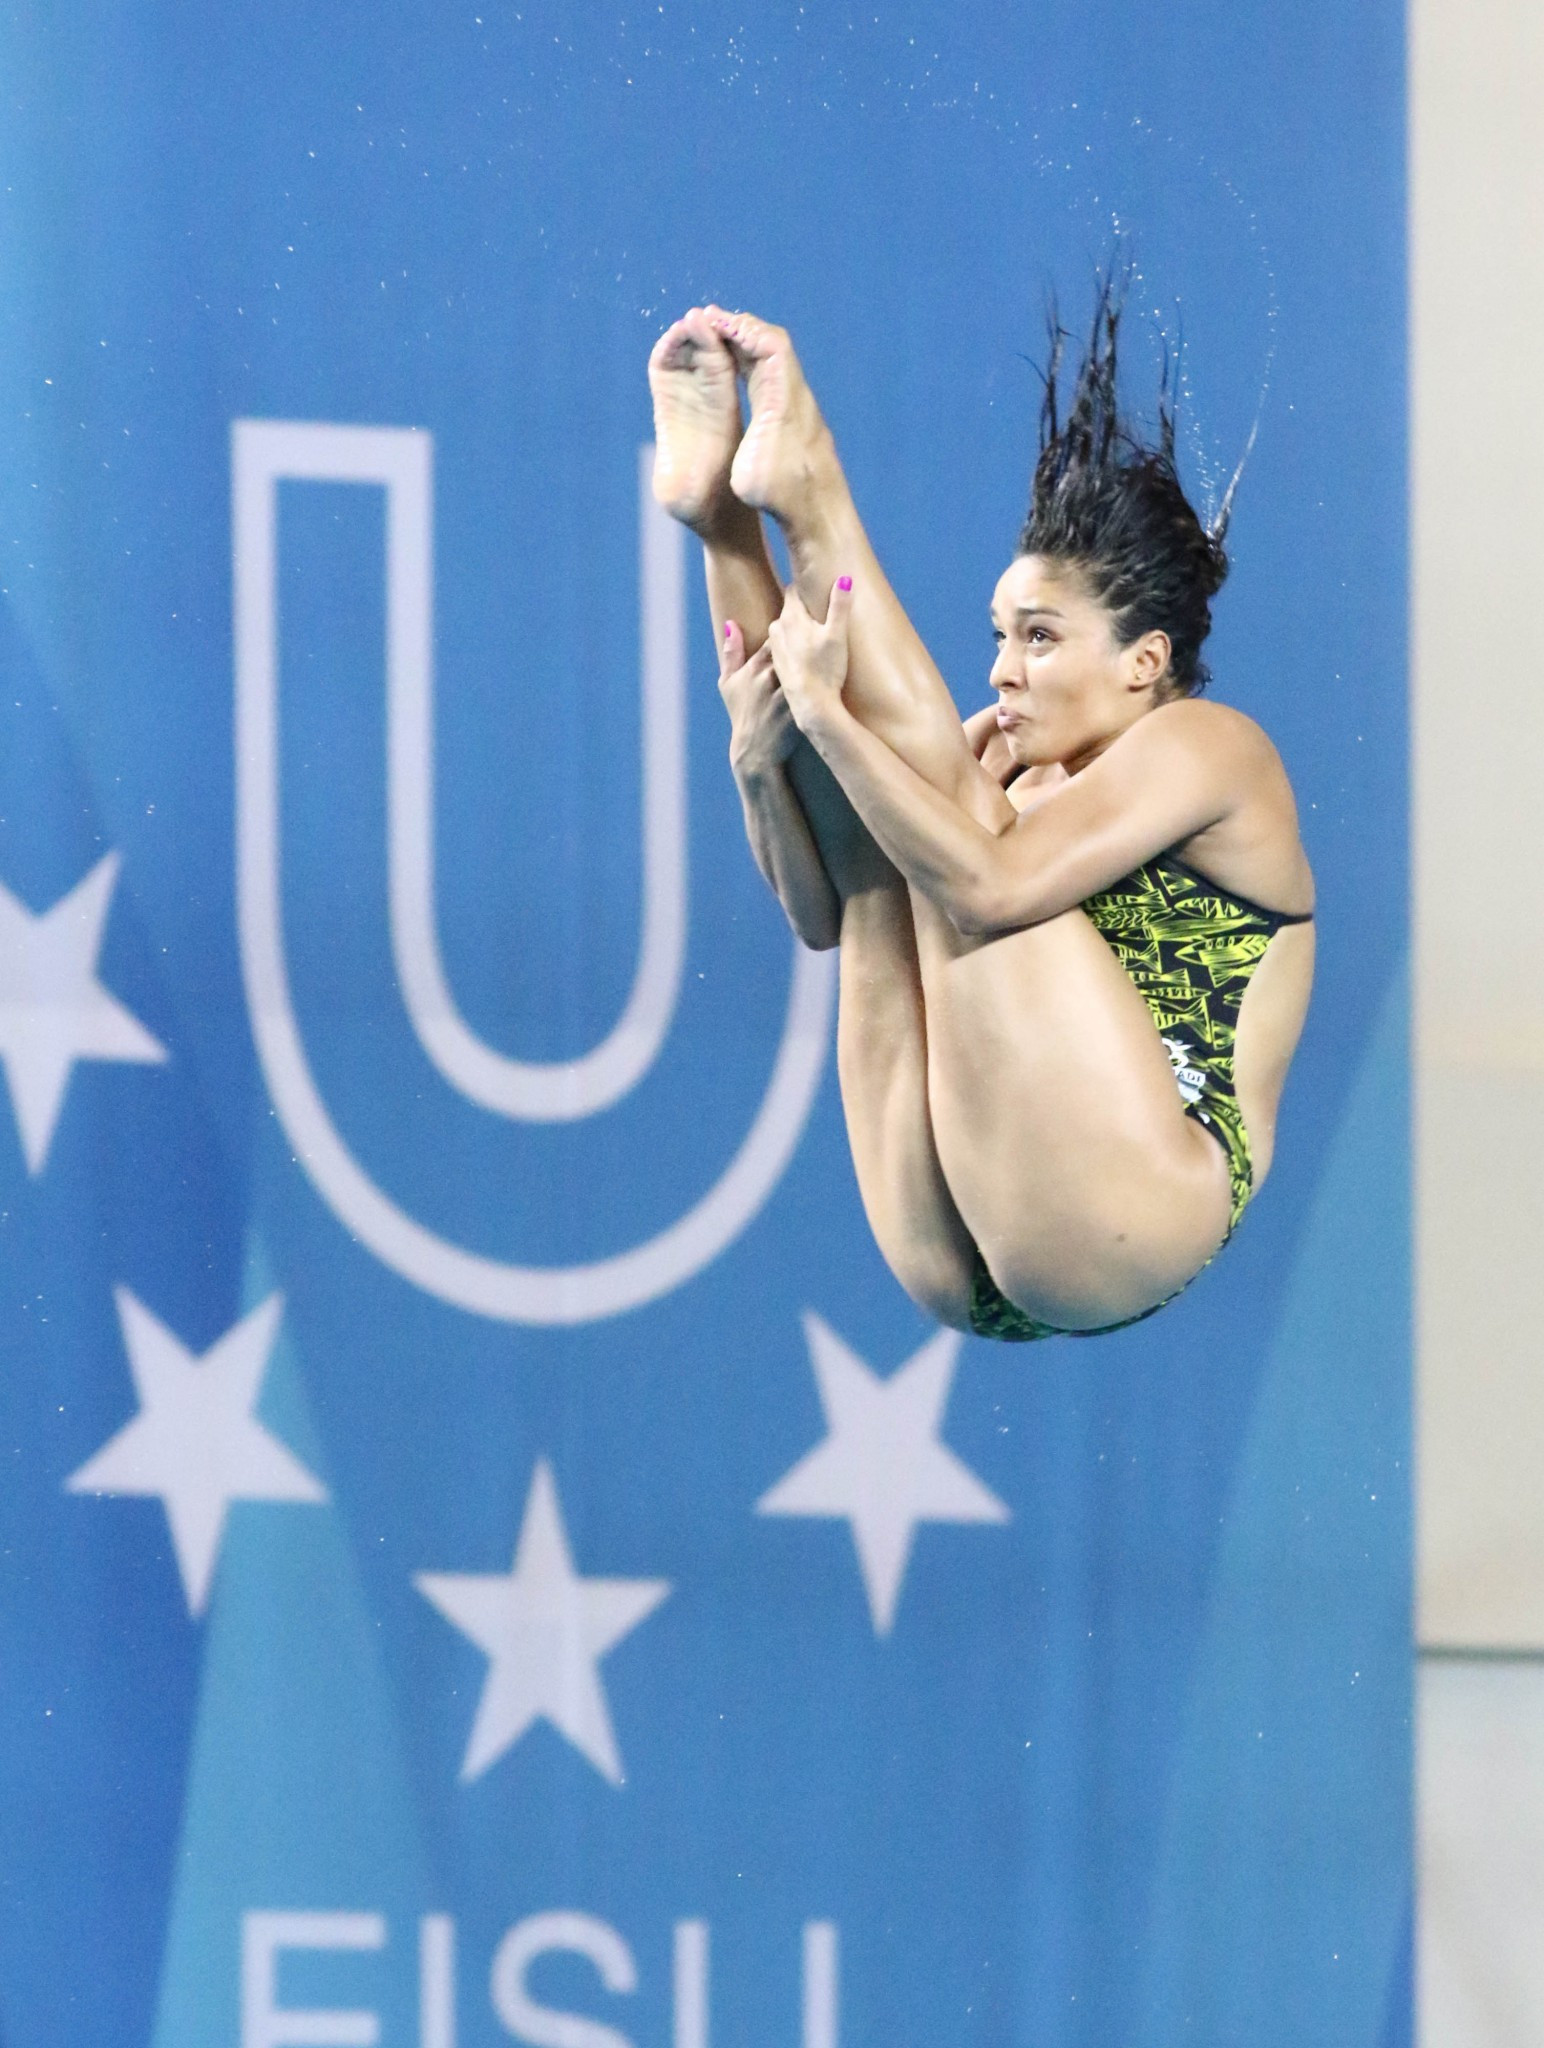 Mexico's Arantxa Chavez claimed the gold medal in the women's 3m springboard ©Taipei 2017